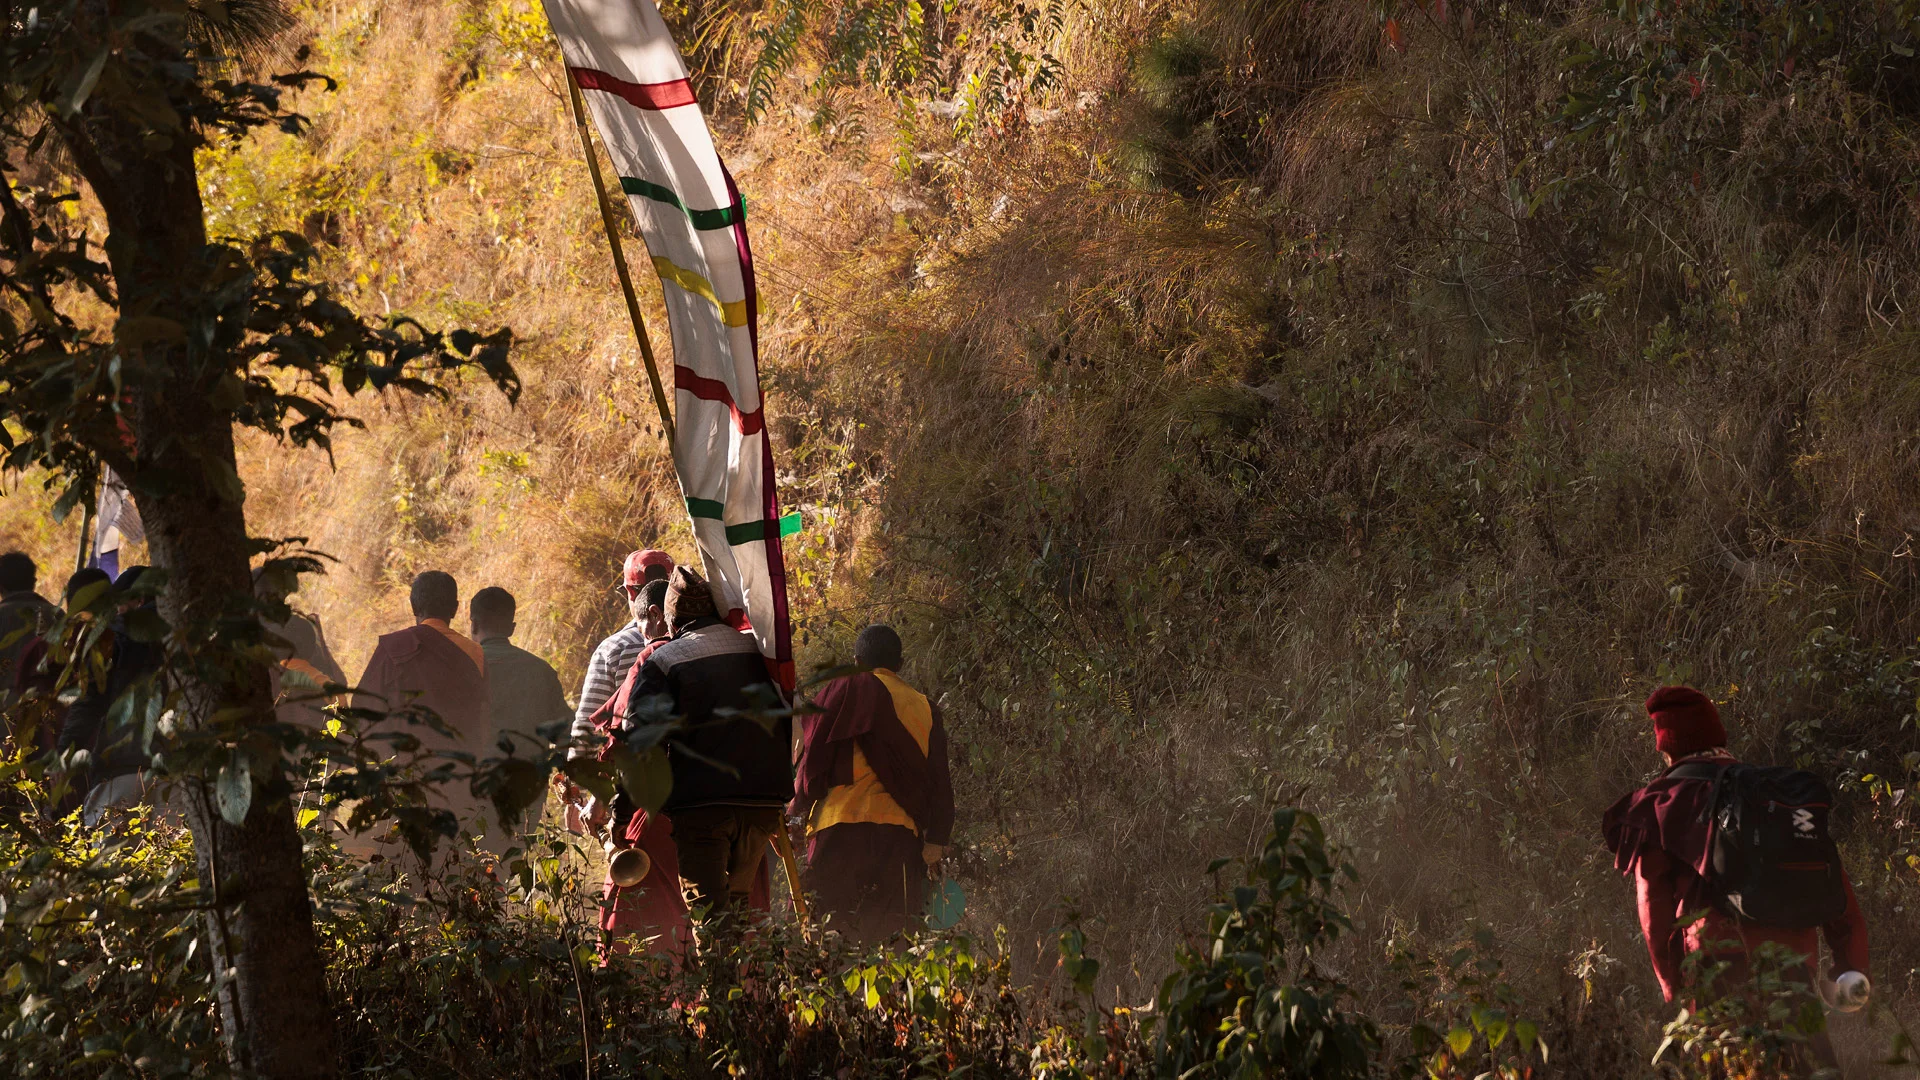 Villagers procession on the way to a sacred cremation ground in remote village of nepal